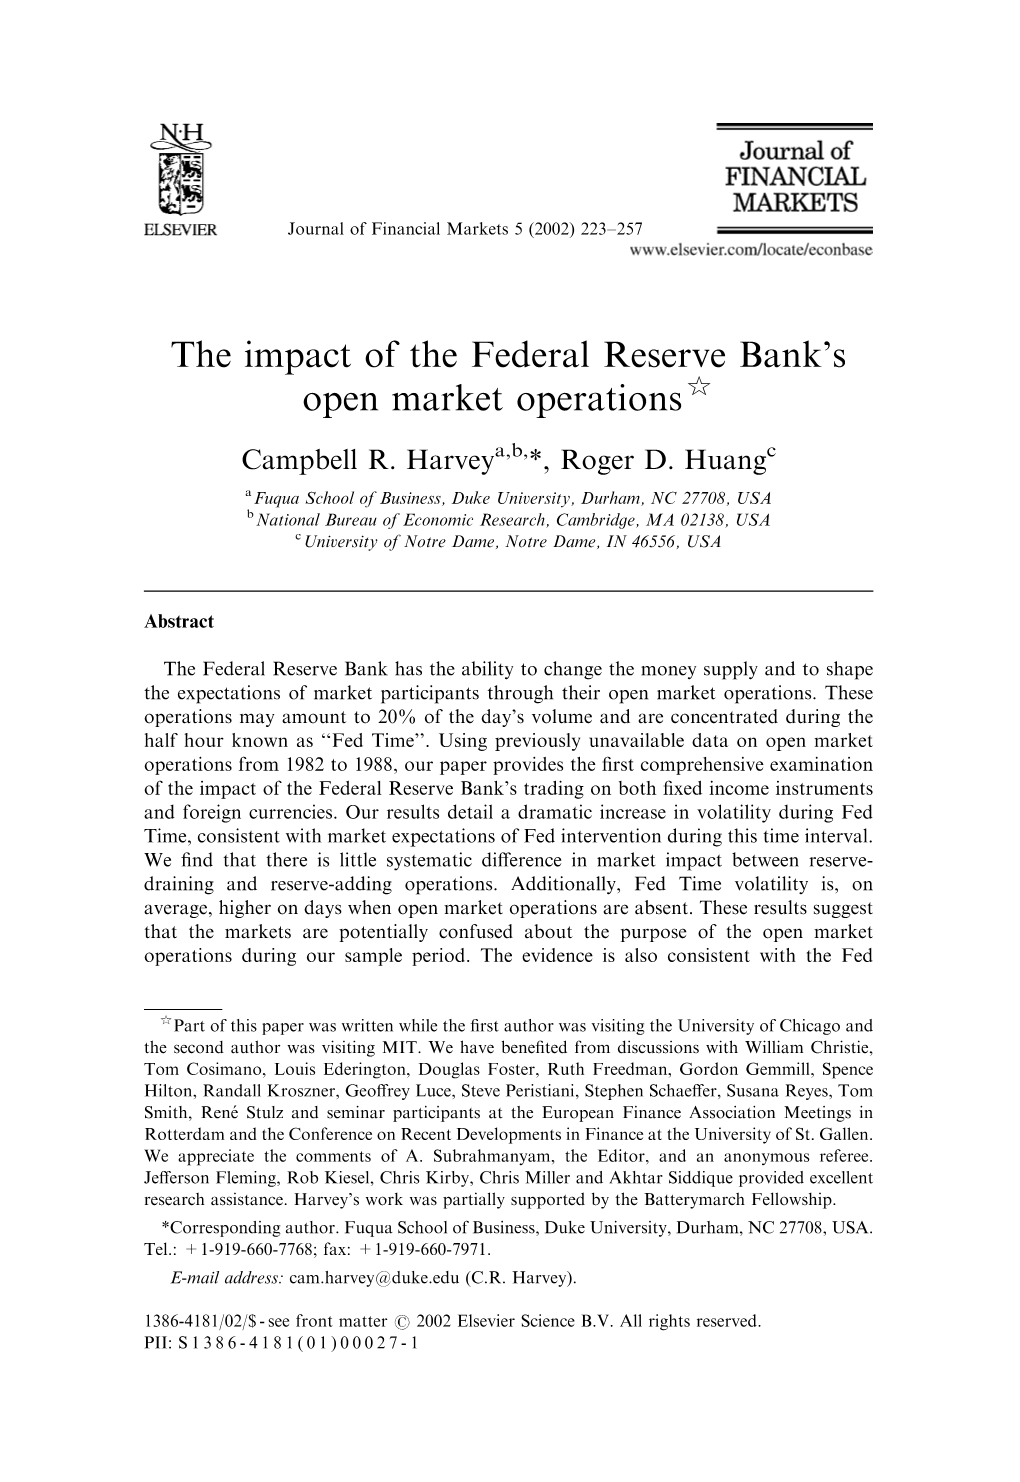 The Impact of the Federal Reserve Bank's Open Market Operations